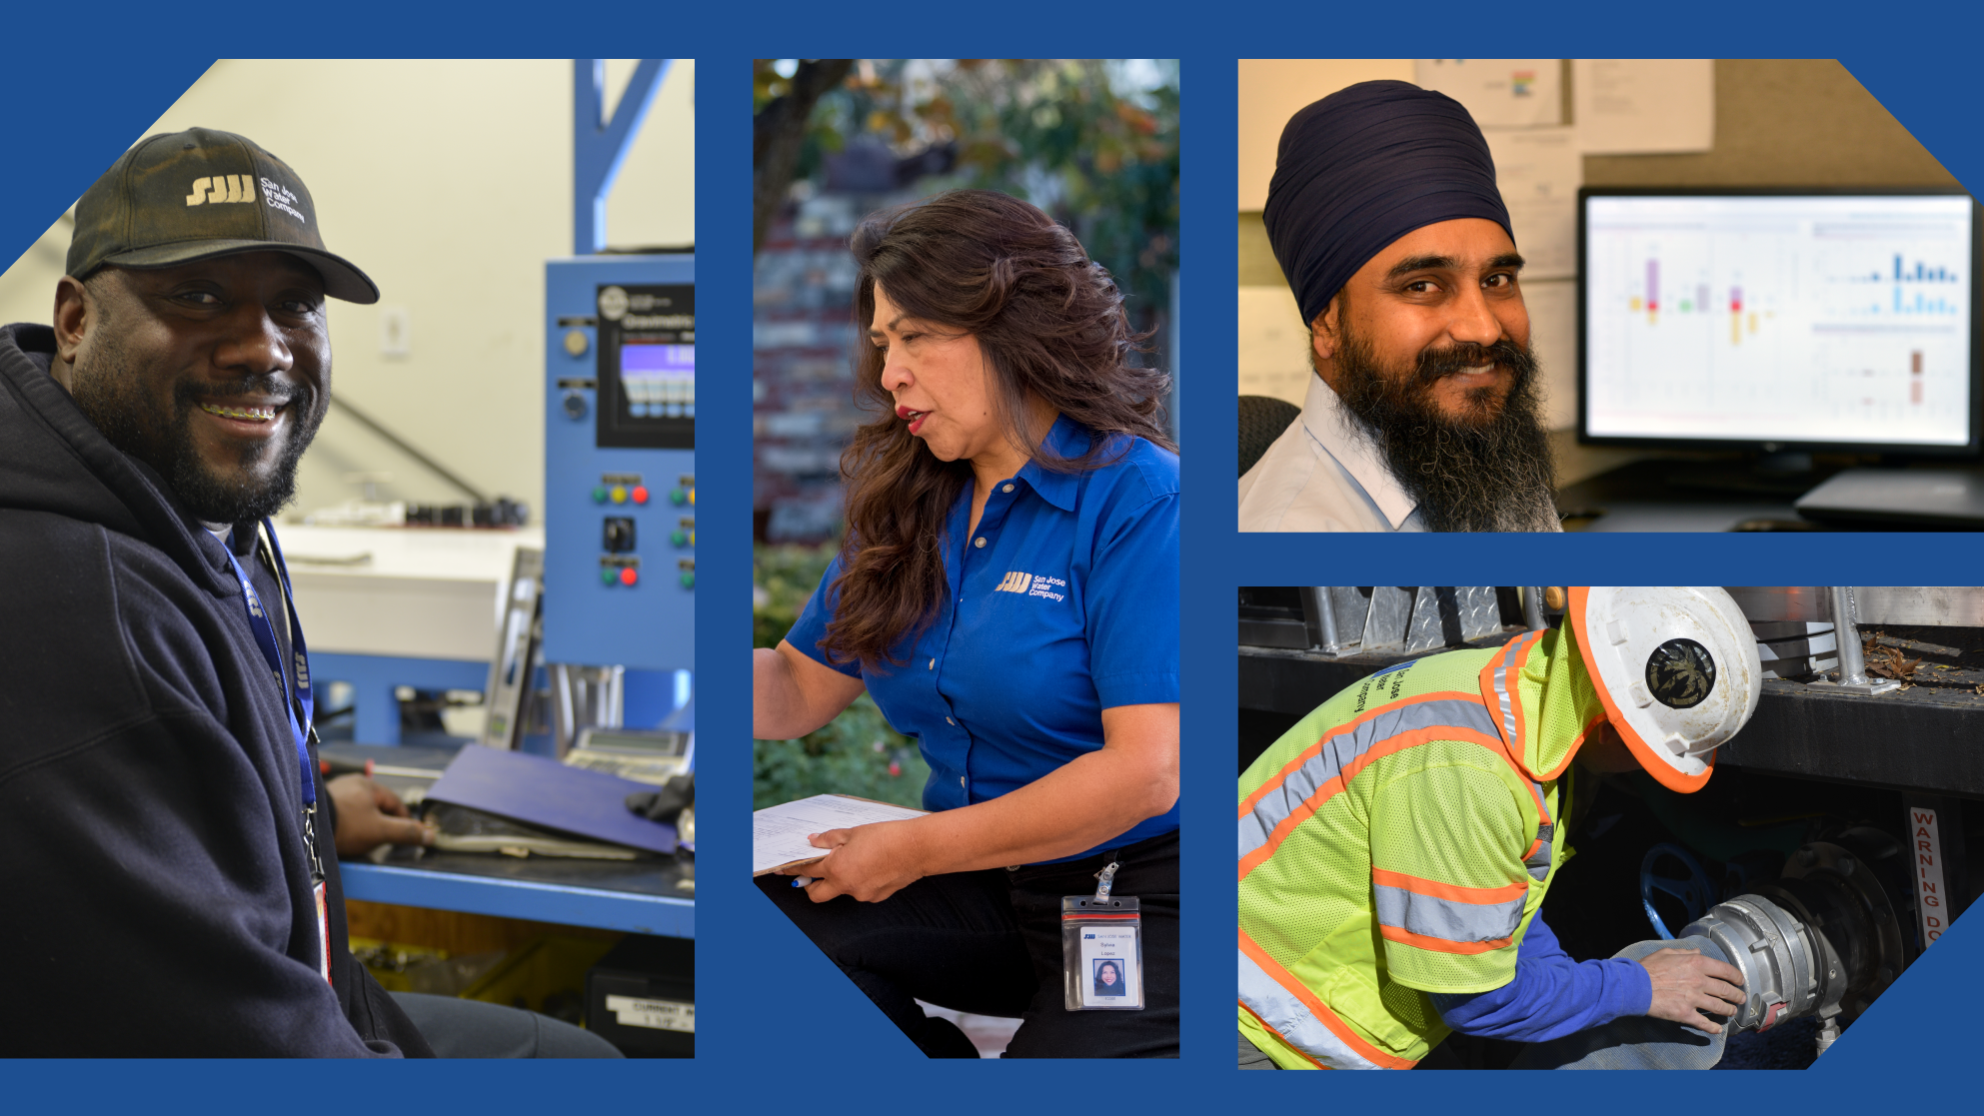 Collage of San Jose Water employees smiling while on the job.